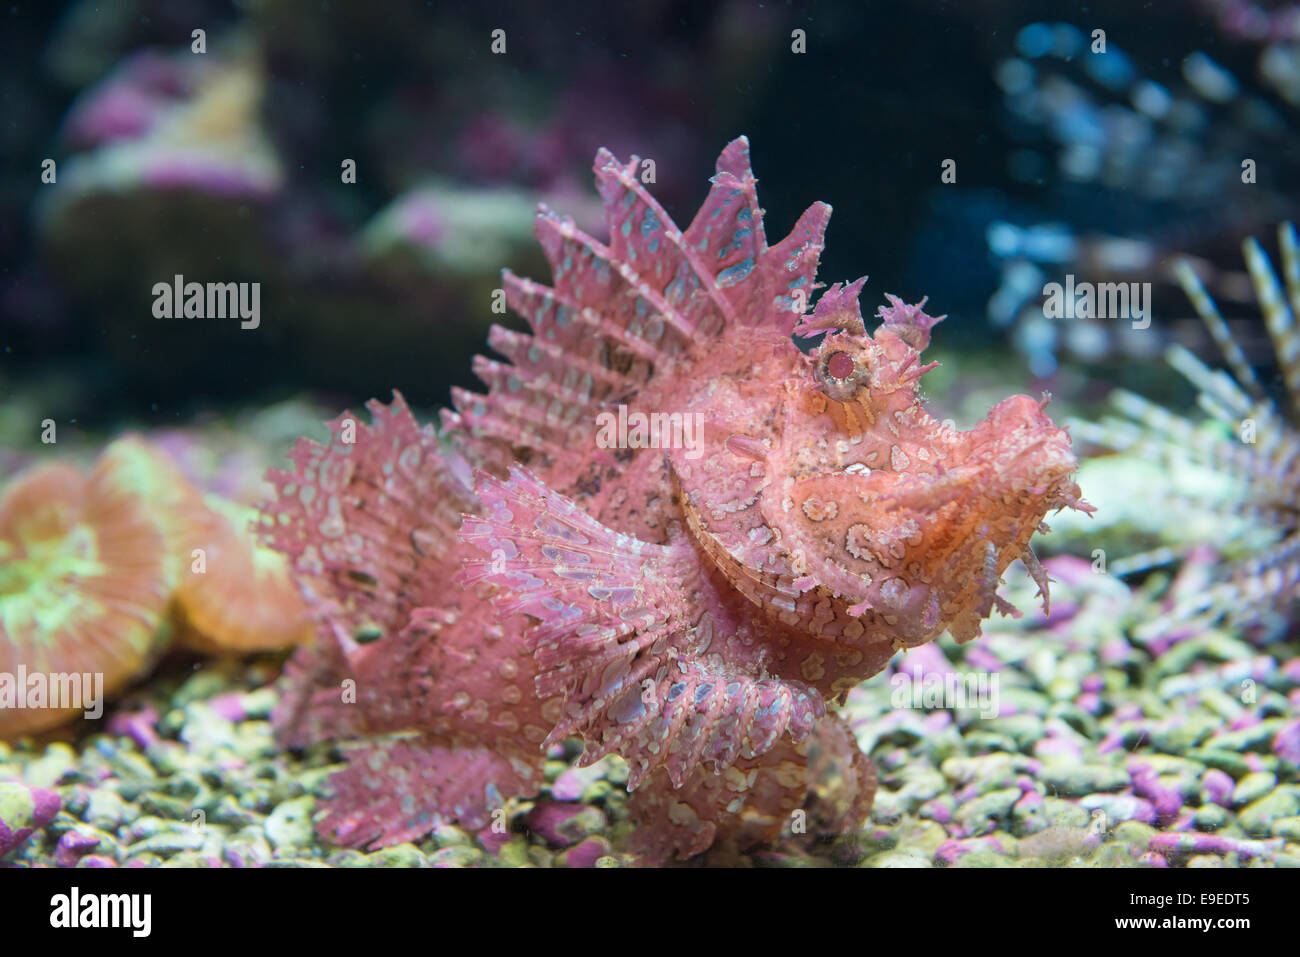 Red scorpionfish (Scorpaena scrofa) uses its unique body shape, skin flaps, and coloration to blend into its underwater surround Stock Photo